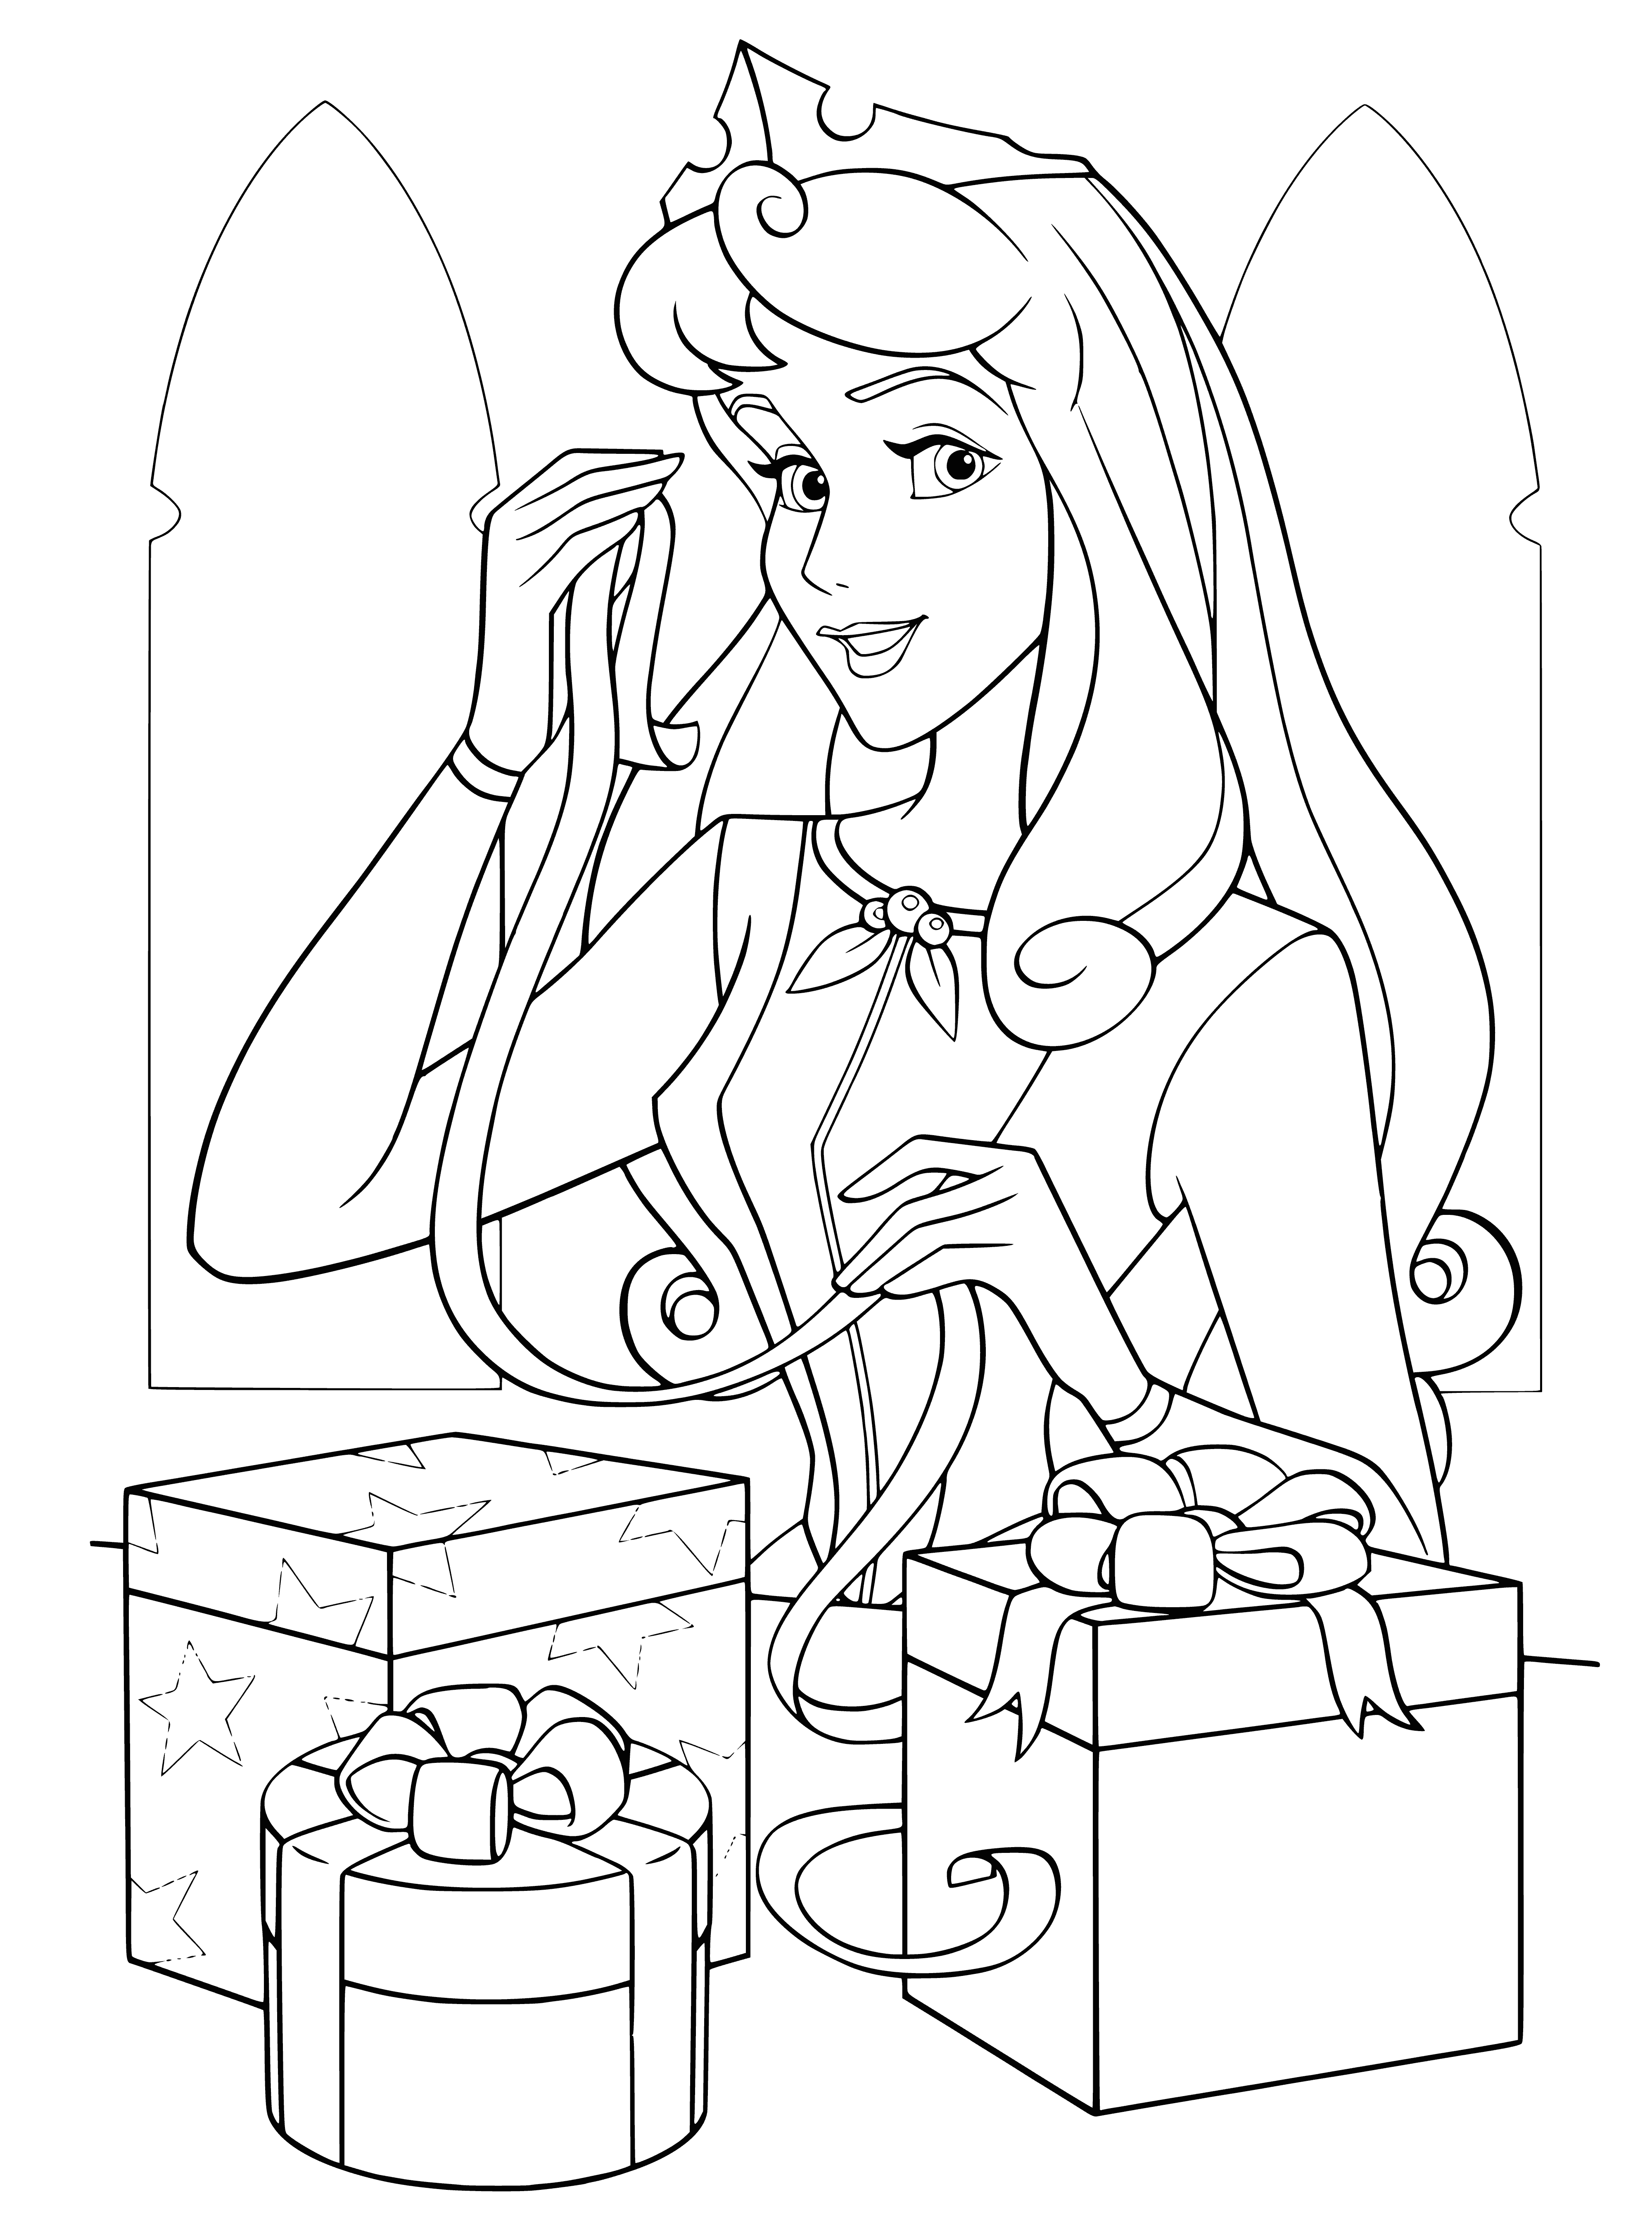 Aurora prepares New Year's gifts coloring page